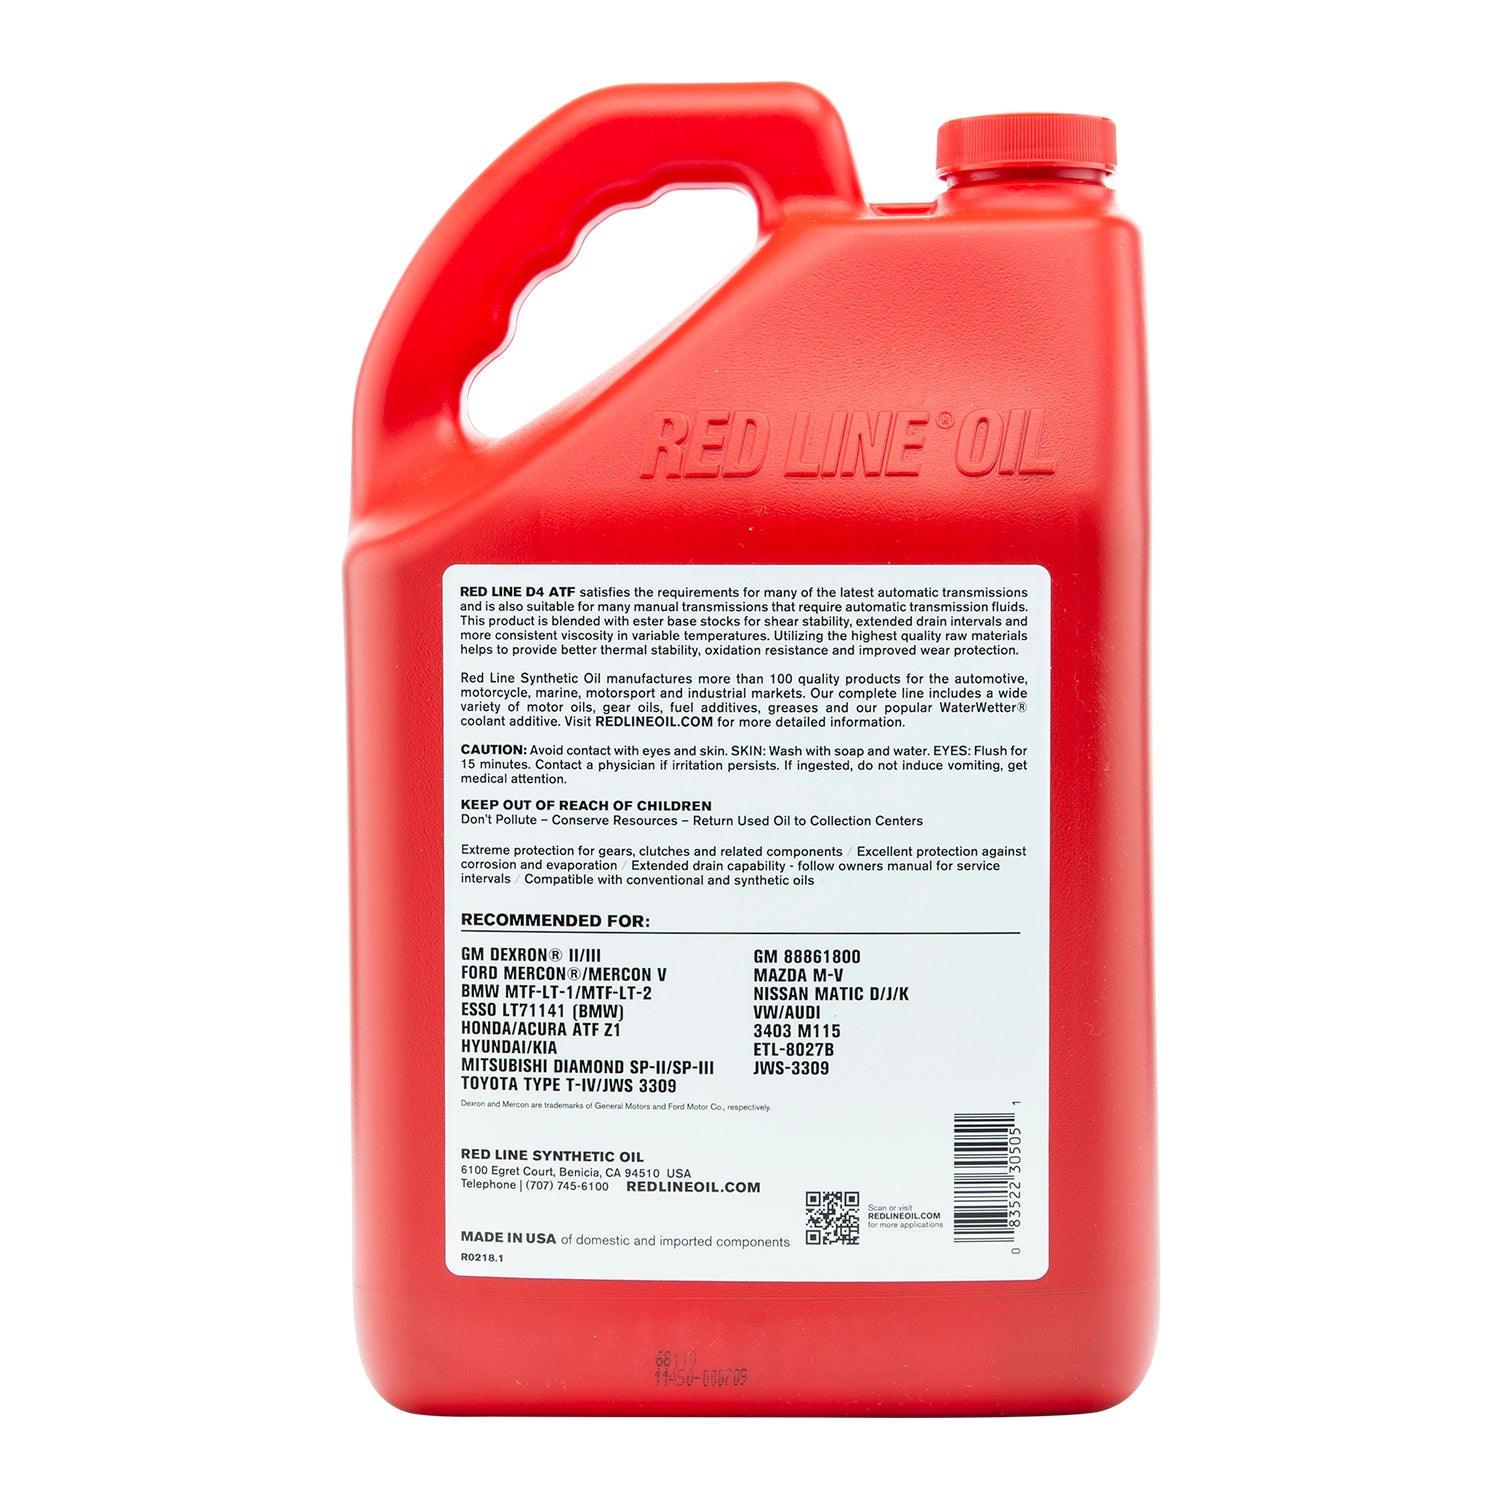 Red Line Synthetic Oil. D4 ATF